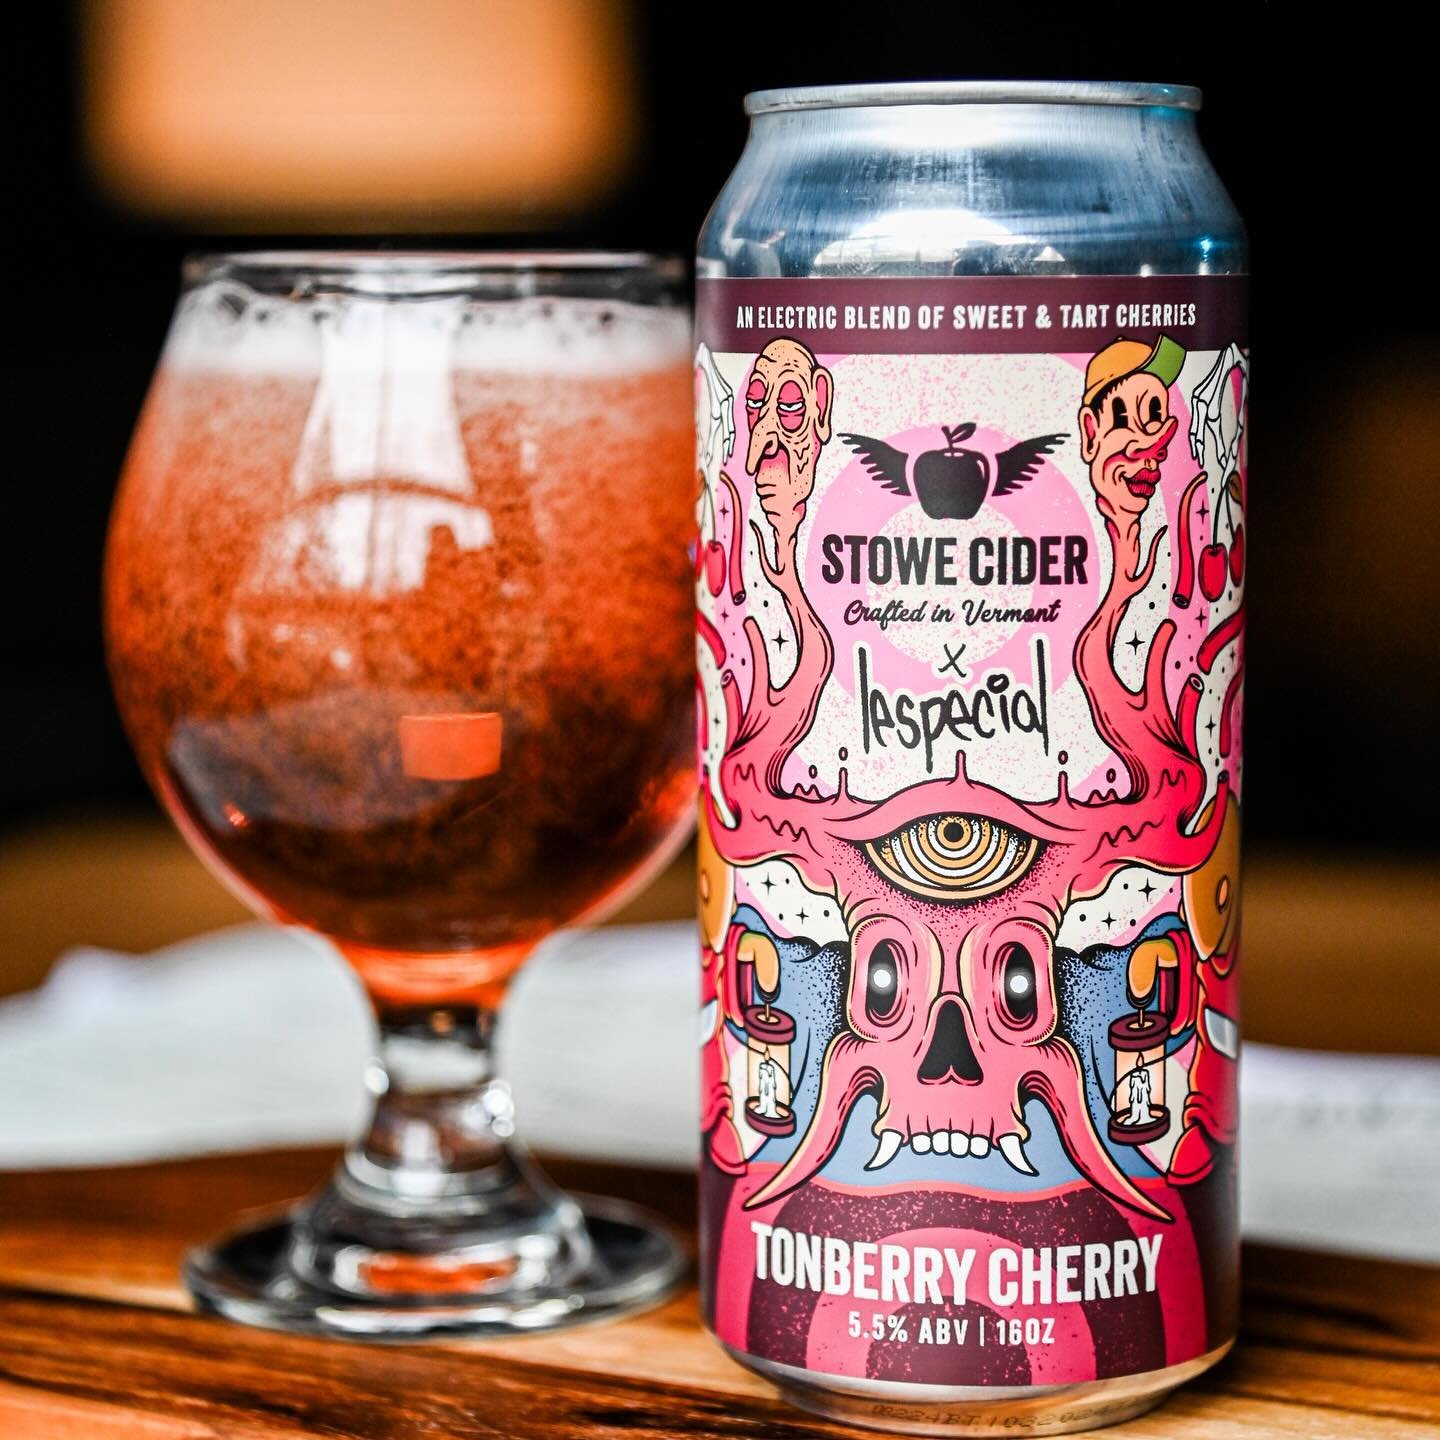 Tonberry Cherry &amp; tons of fun at Shakedown Street 🍒 What&rsquo;s happening this weekend?

FRIDAY:

Friday Night Music with @minced_oats from 5-8pm in the taproom (FREE!)

SATURDAY:

Cider Saturday with John Lackard from 4-7pm in the taproom (FRE